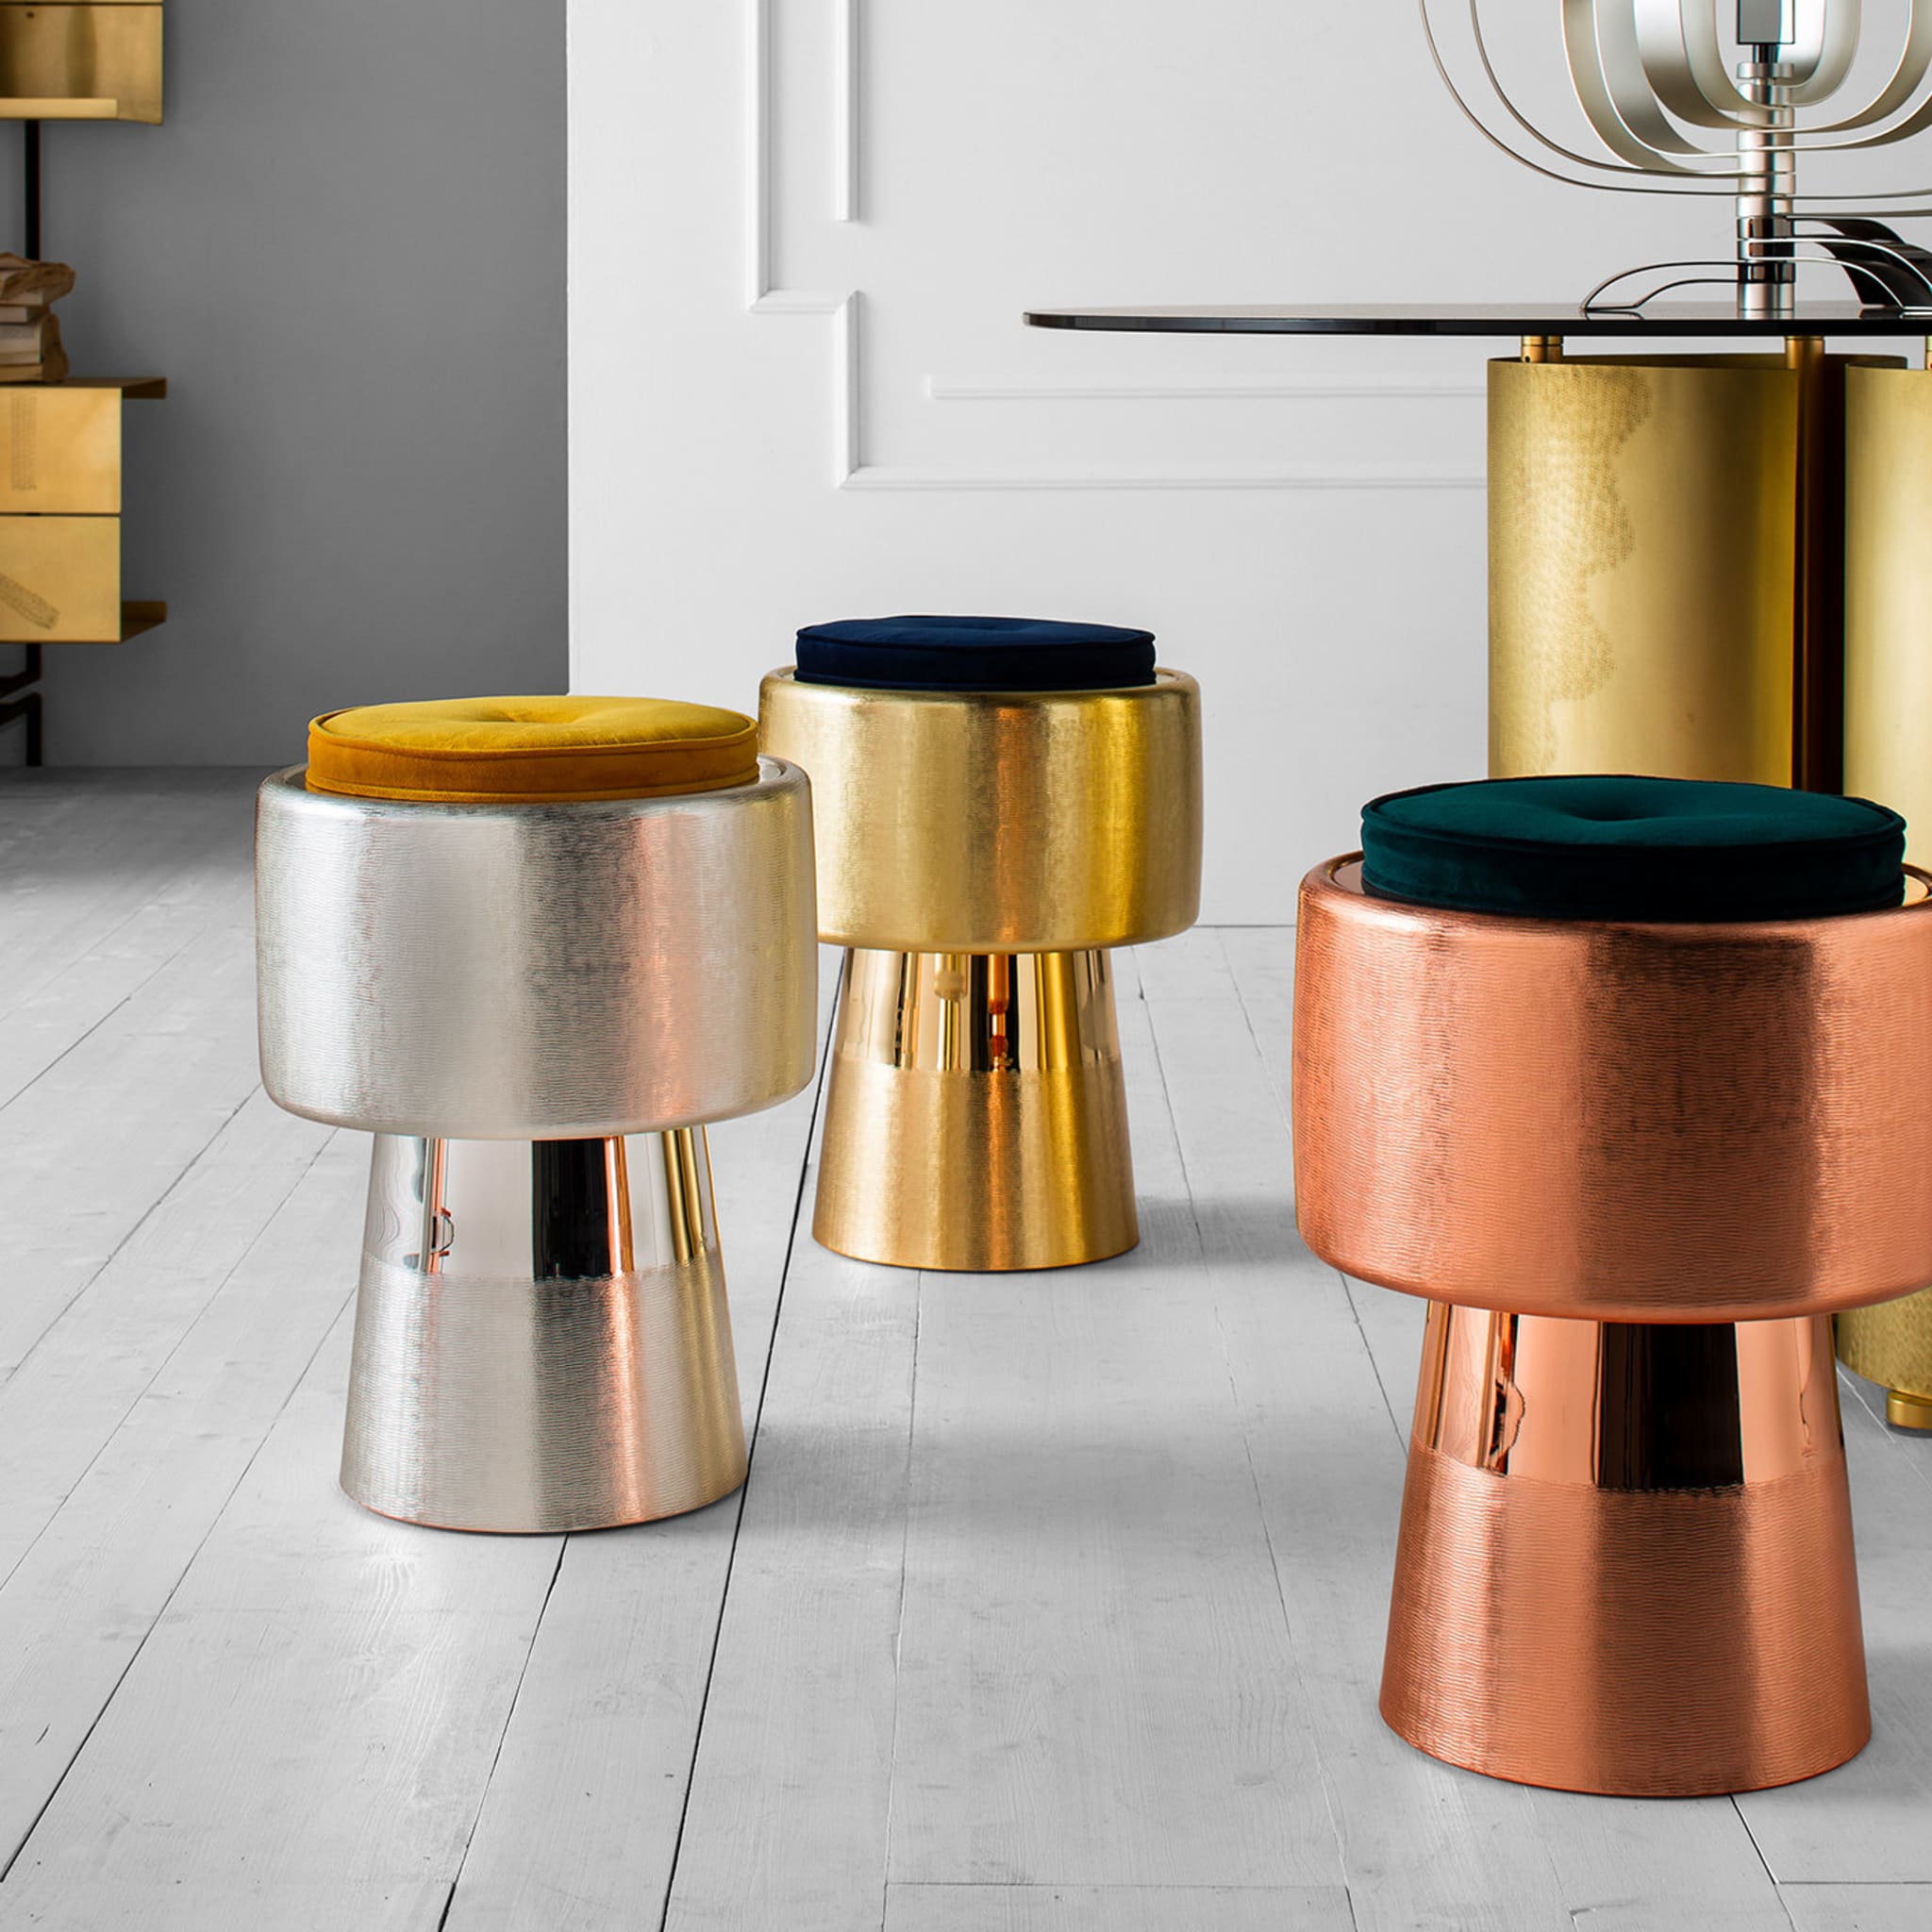 Tappo Bronze Stool by NOOII - Alternative view 1